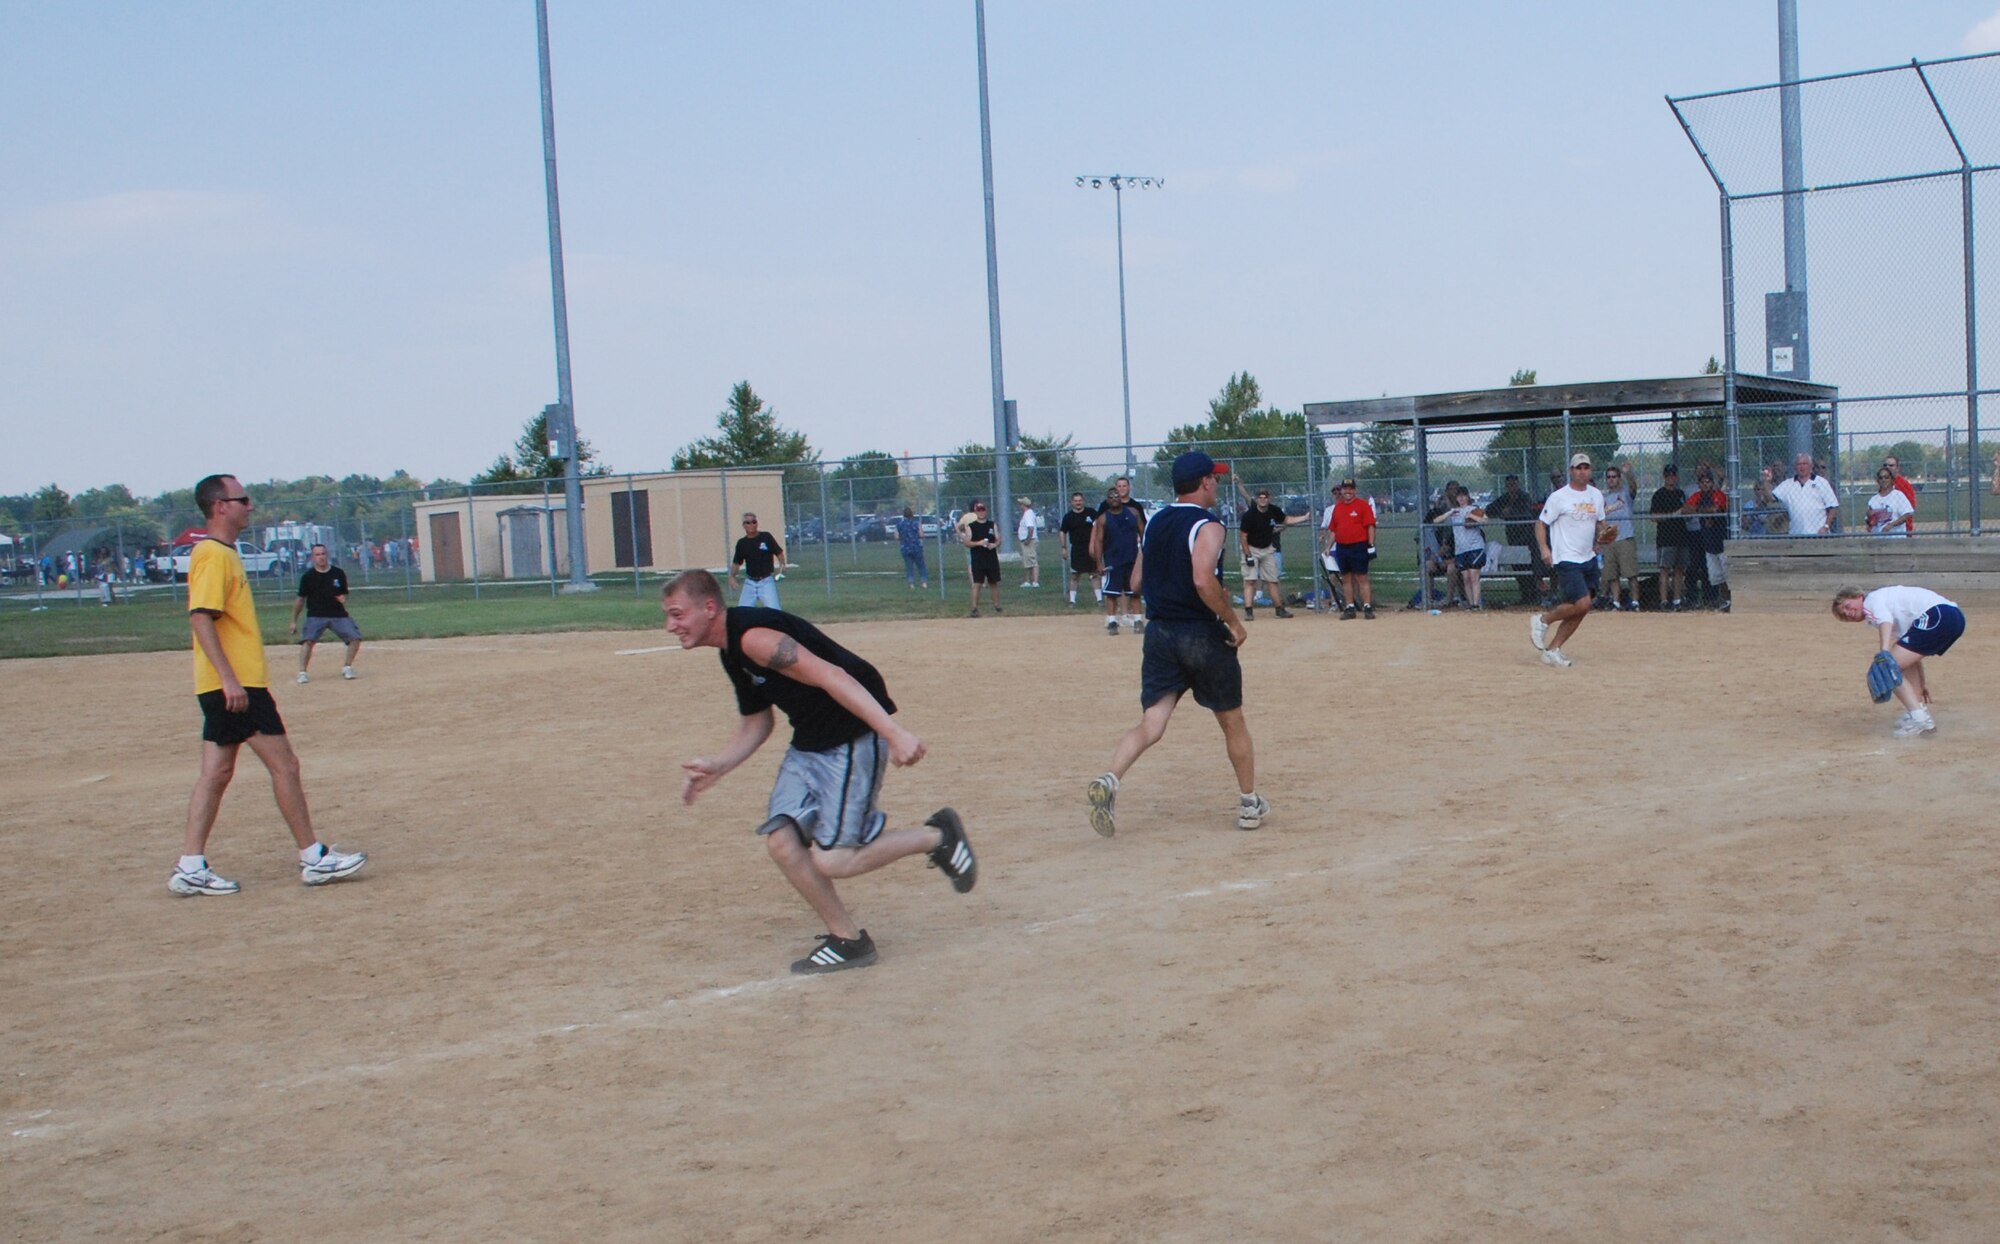 932ndHey there batter!  An officer of the 932nd Airlift Wing prepares to run back after the fpitch to home dring at the recent softball match.